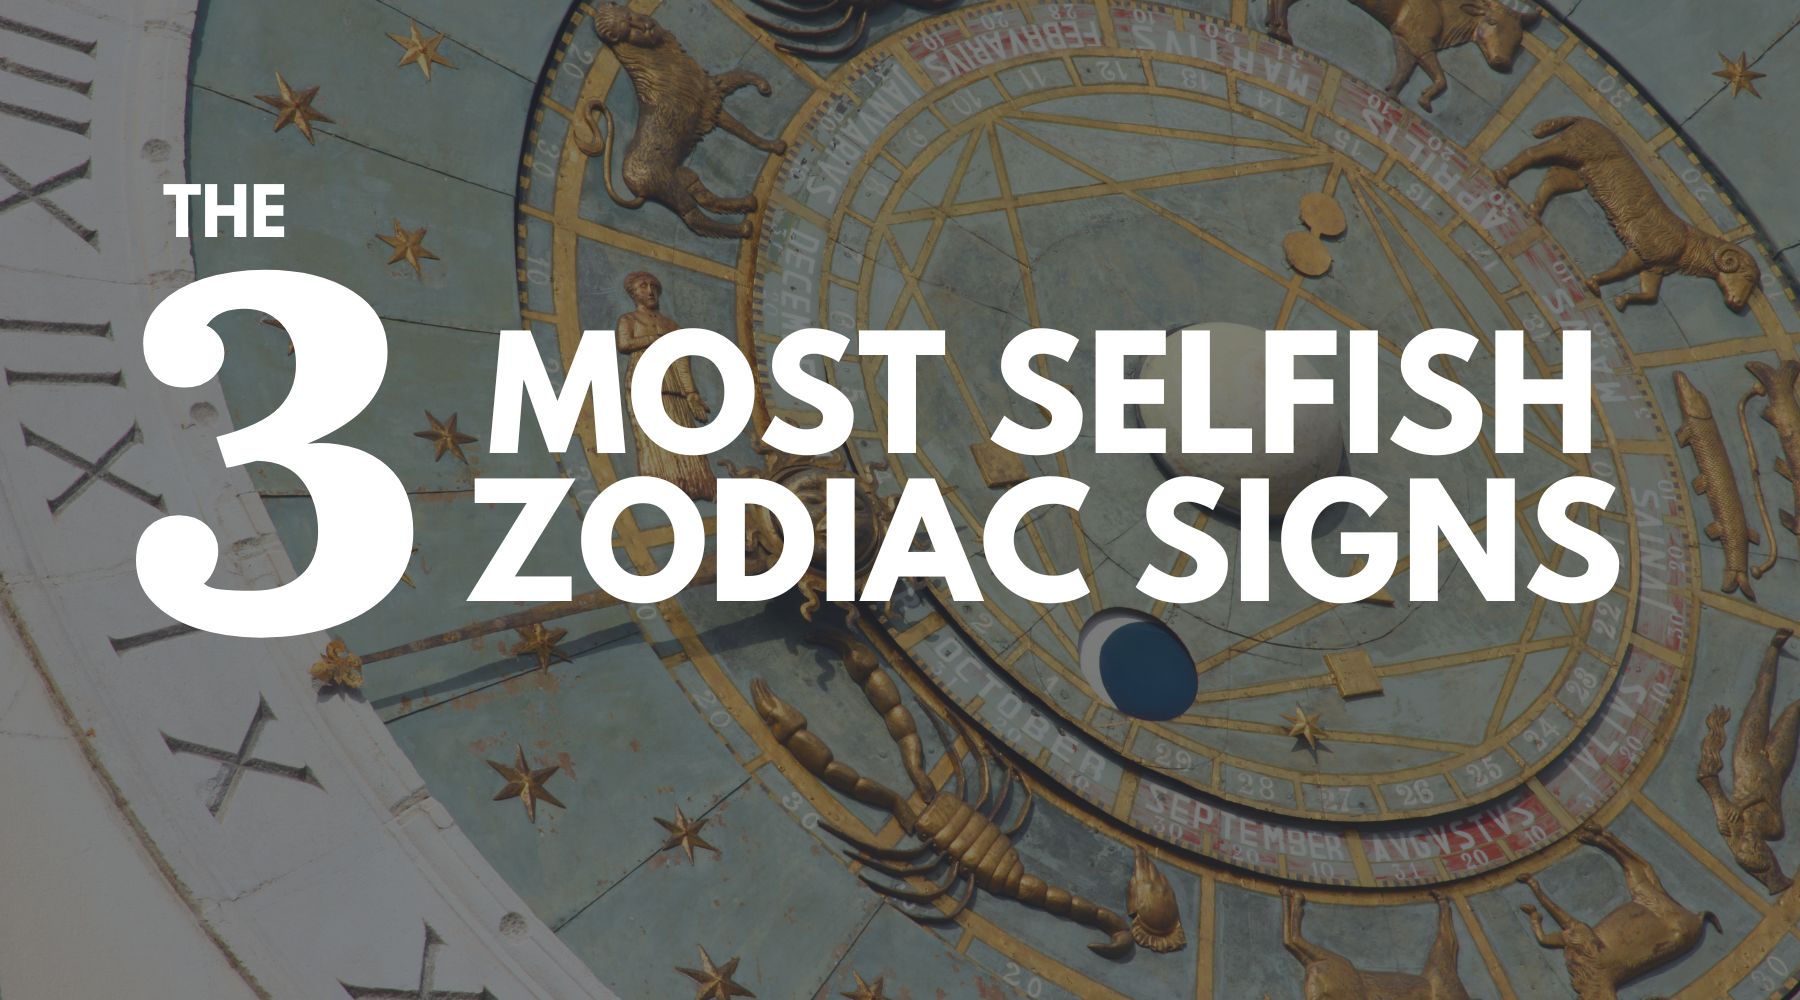 The 3 most selfish zodiac signs-Are they considering you?